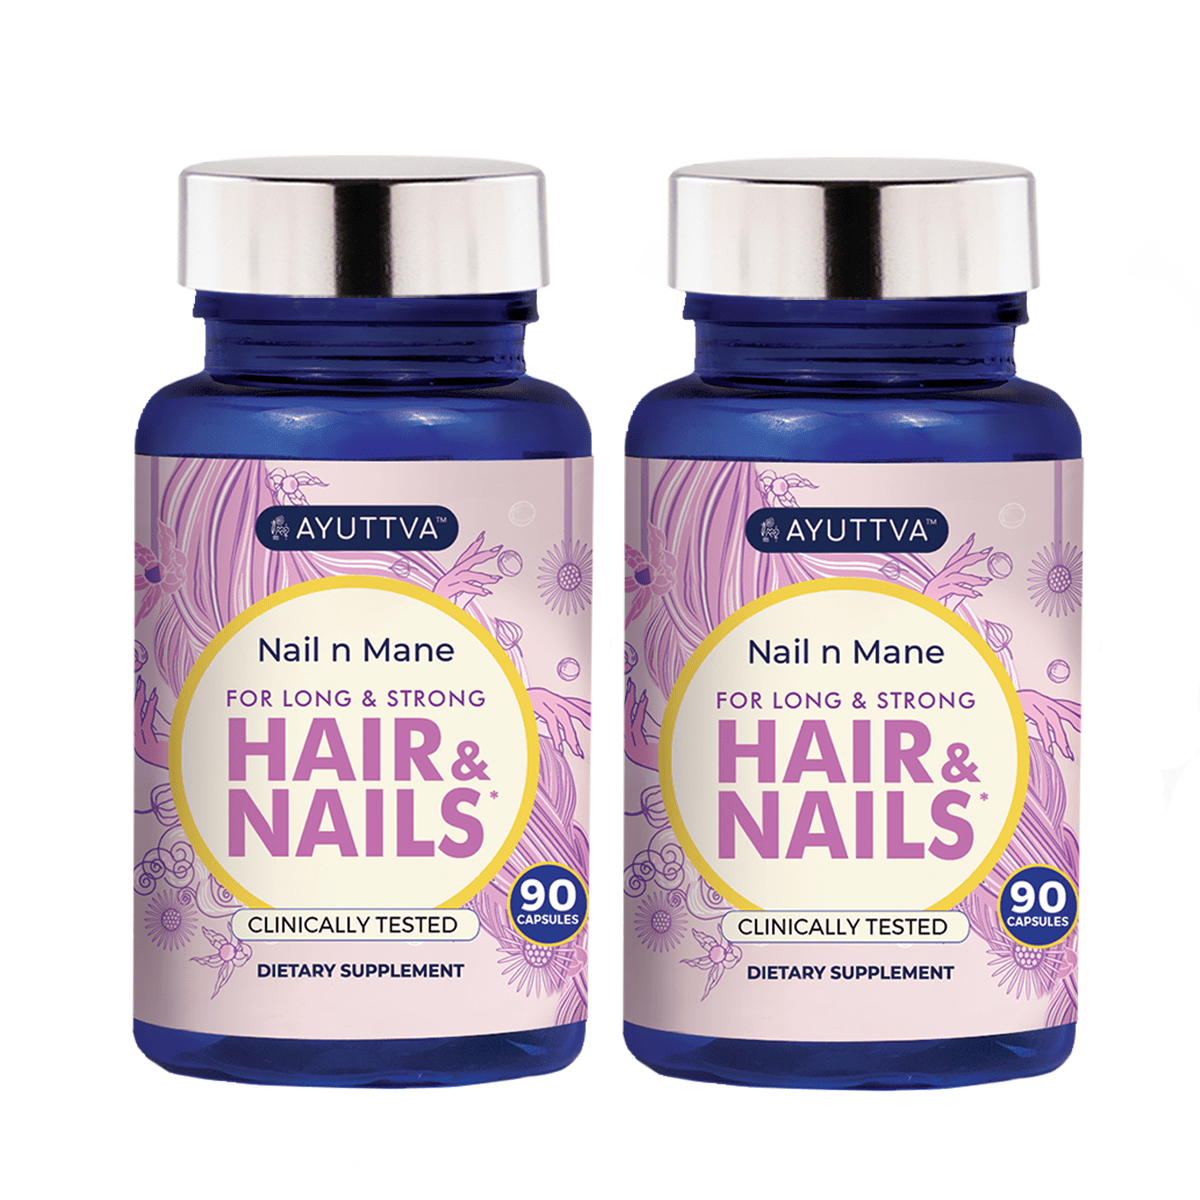 Nail n Mane - Ayurvedic Supplement for Healthy, Strong and Lustrous Hair and Nails - Pack of 2 Supplements Ayuttva 